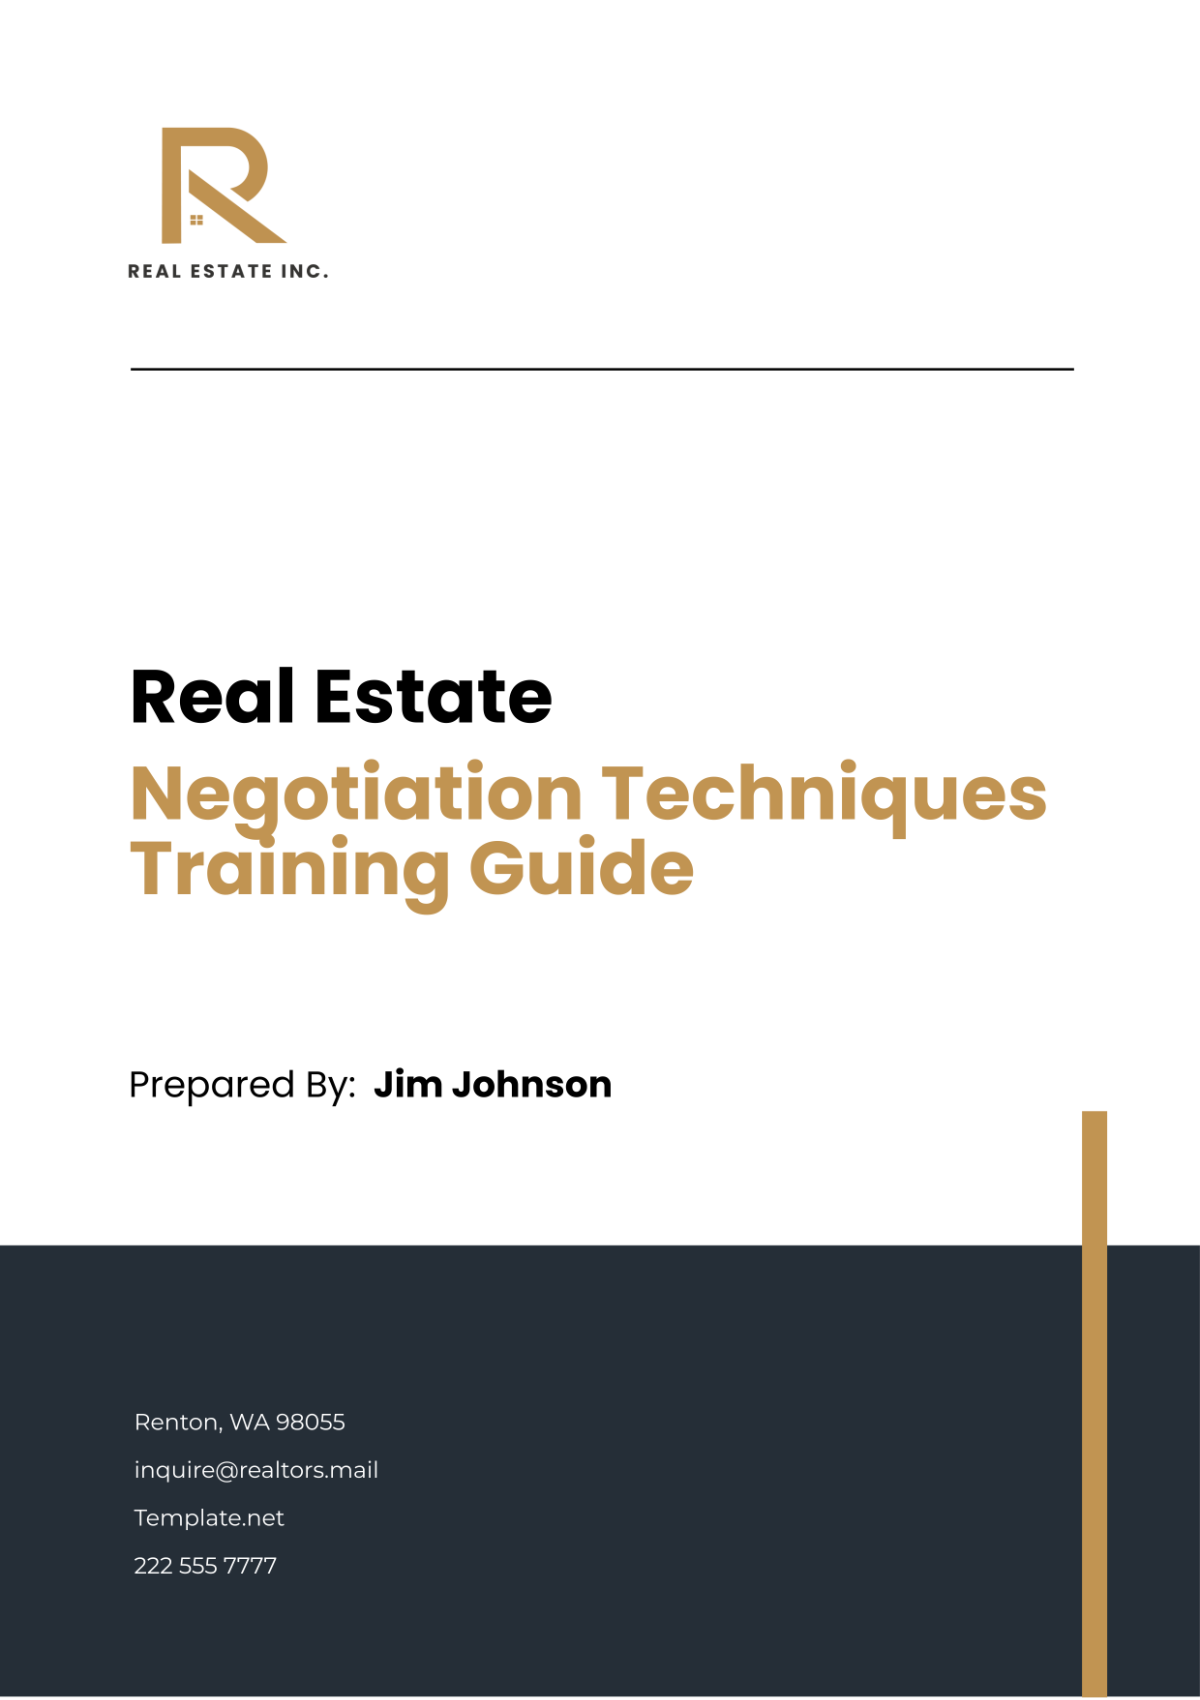 Real Estate Negotiation Techniques Training Guide Template